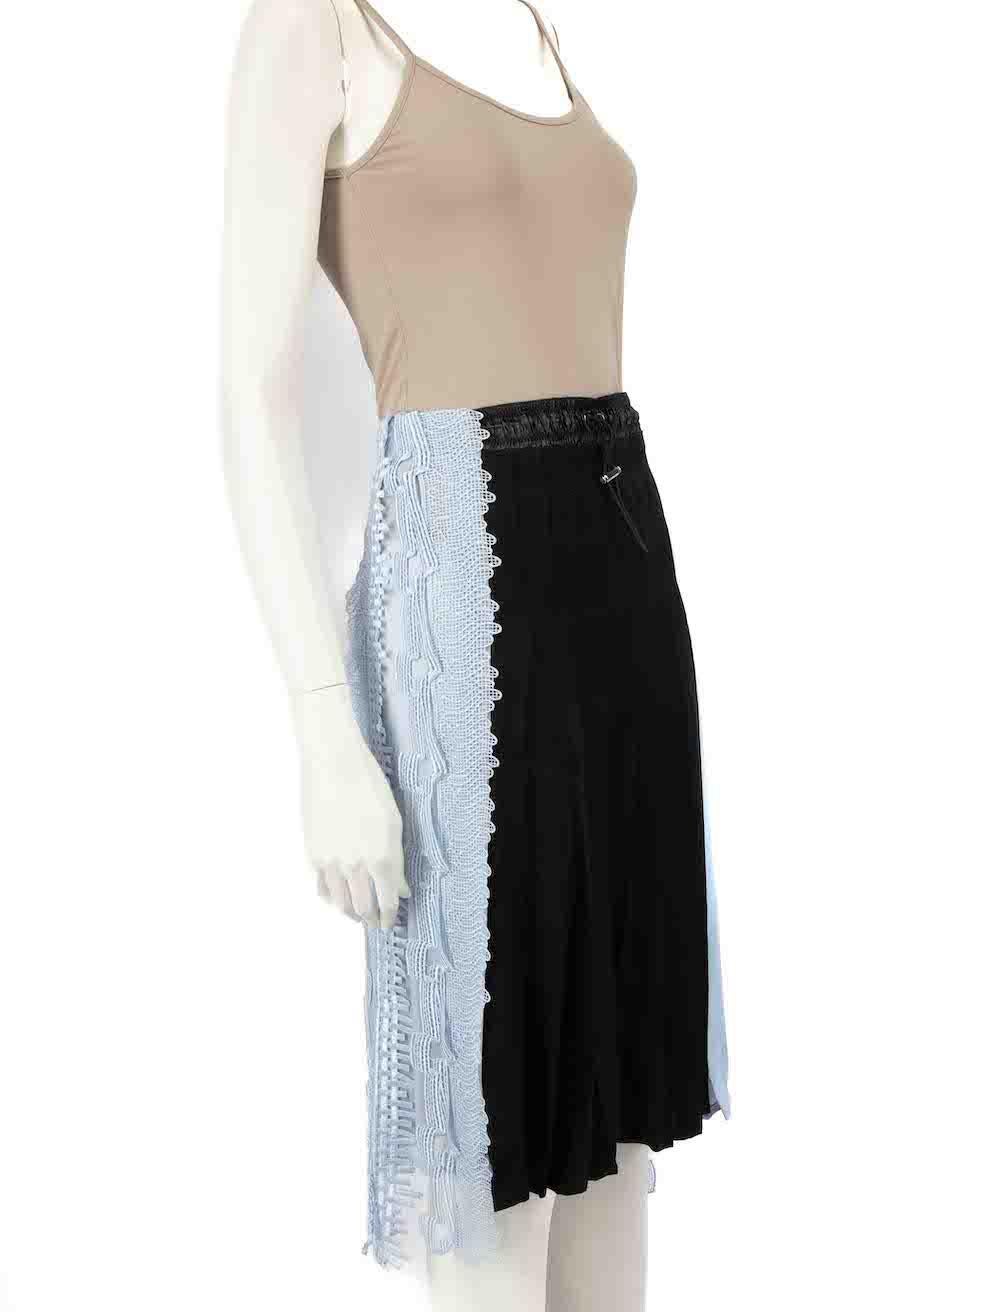 CONDITION is Very good. Minimal wear to skirt is evident. Minimal wear to the right-side and frontwith discoloured marks to the lace on this used Versace designer resale item.
 
 
 
 Details
 
 
 Blue and black
 
 Synthetic
 
 Knee length skirt
 
